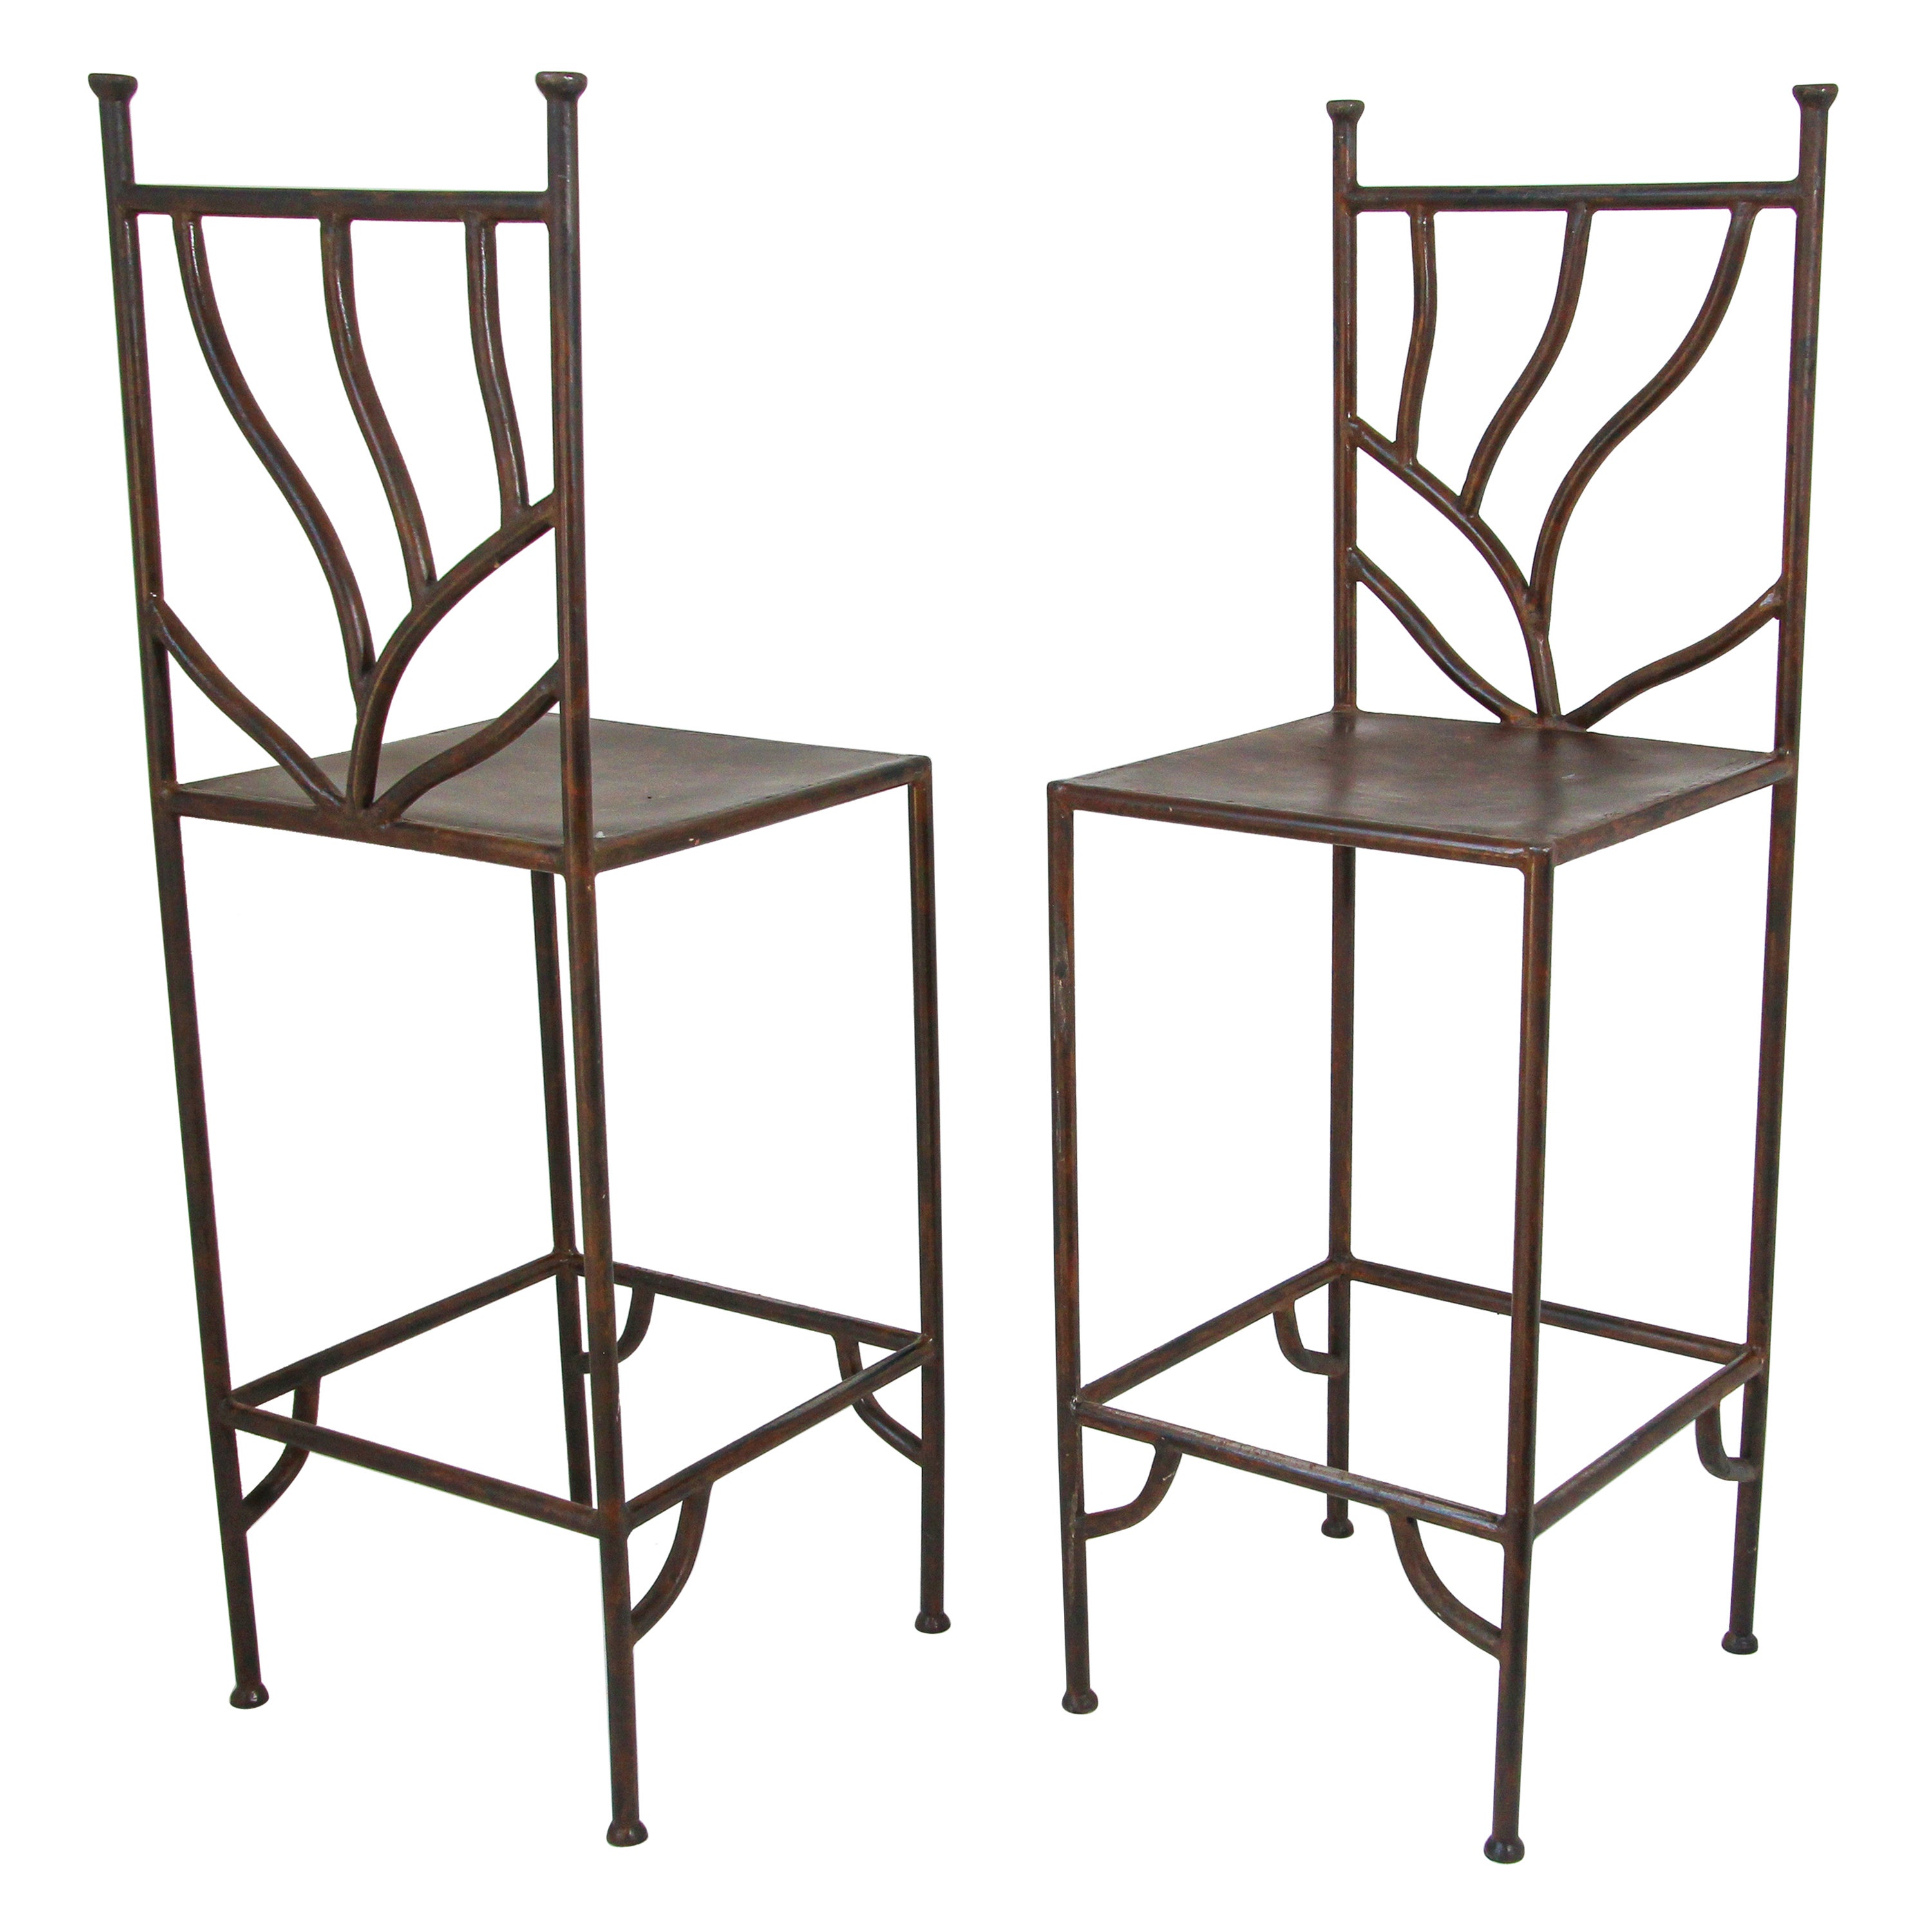 Vintage Wrought Iron Barstools with Back Set of Two Spanish Revival For Sale